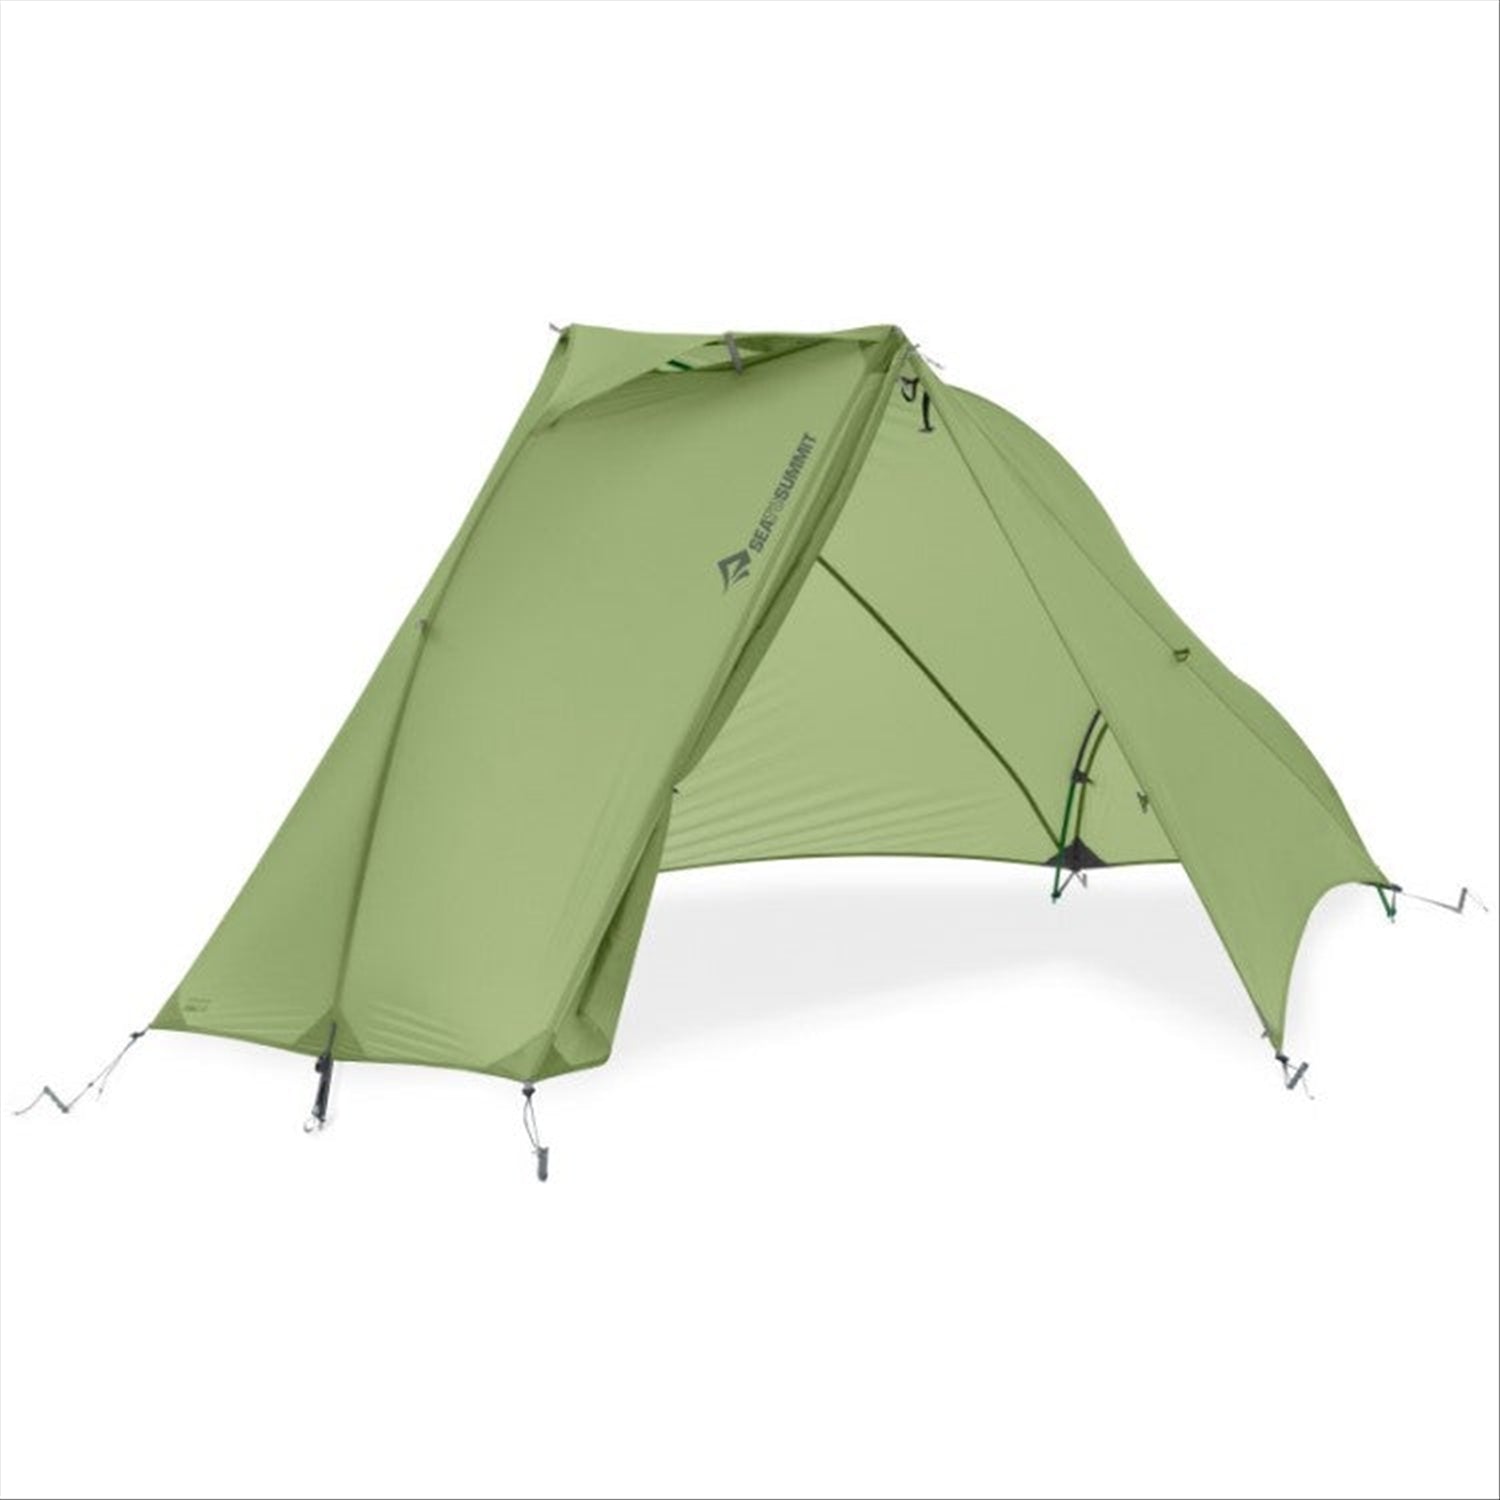 Sea to Summit Sea To Summit Alto TR1 Plus Ultralite Backpacking Tent, 1.228kg